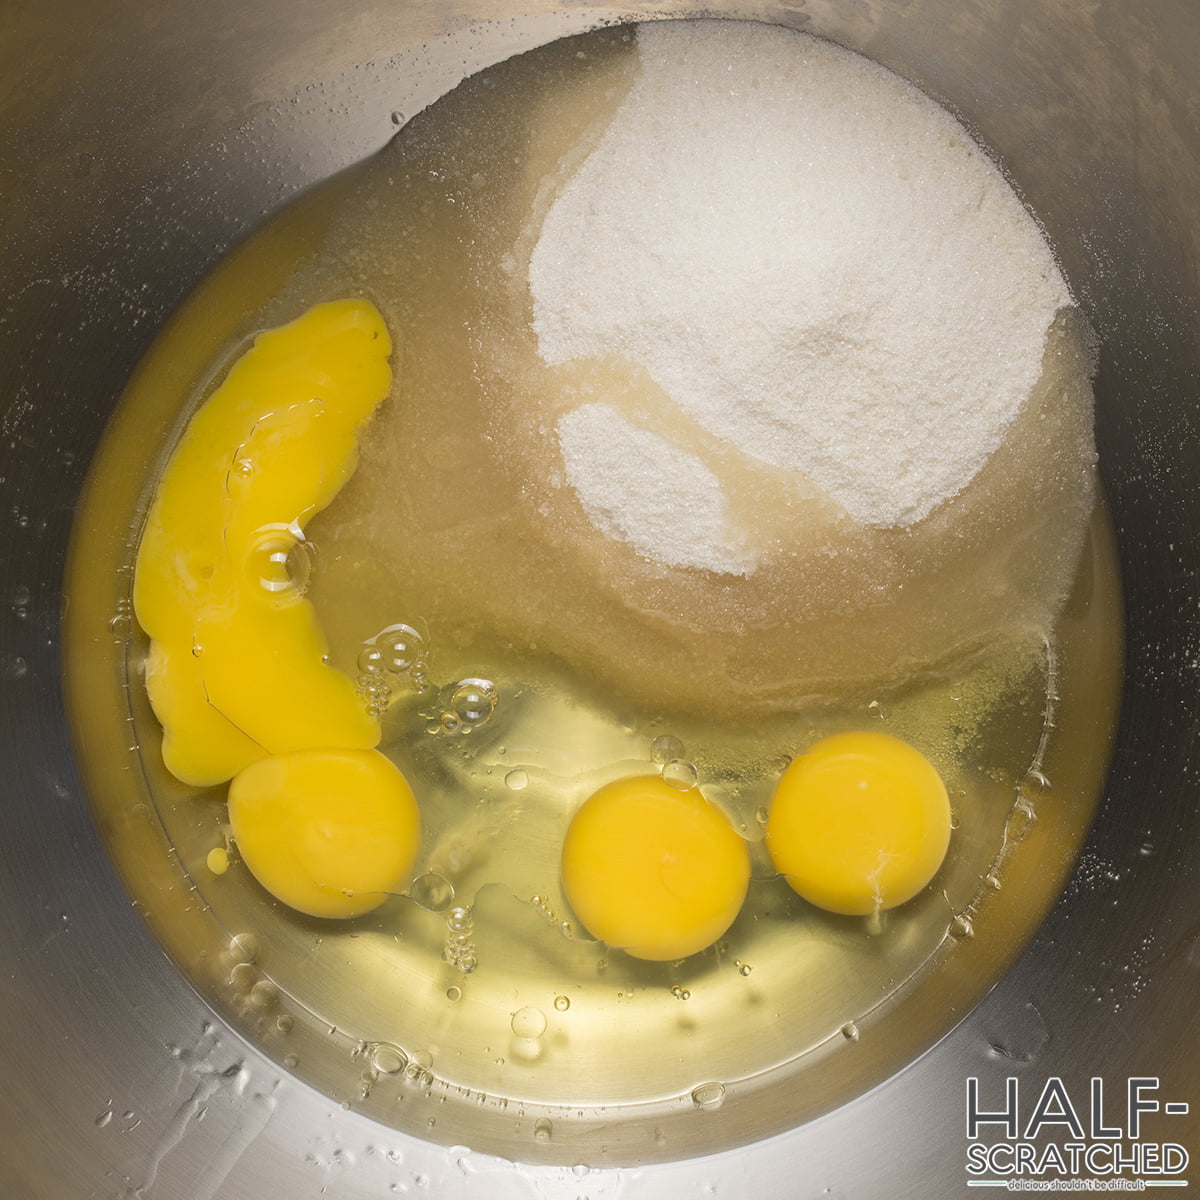 Eggs and sugar in a bowl